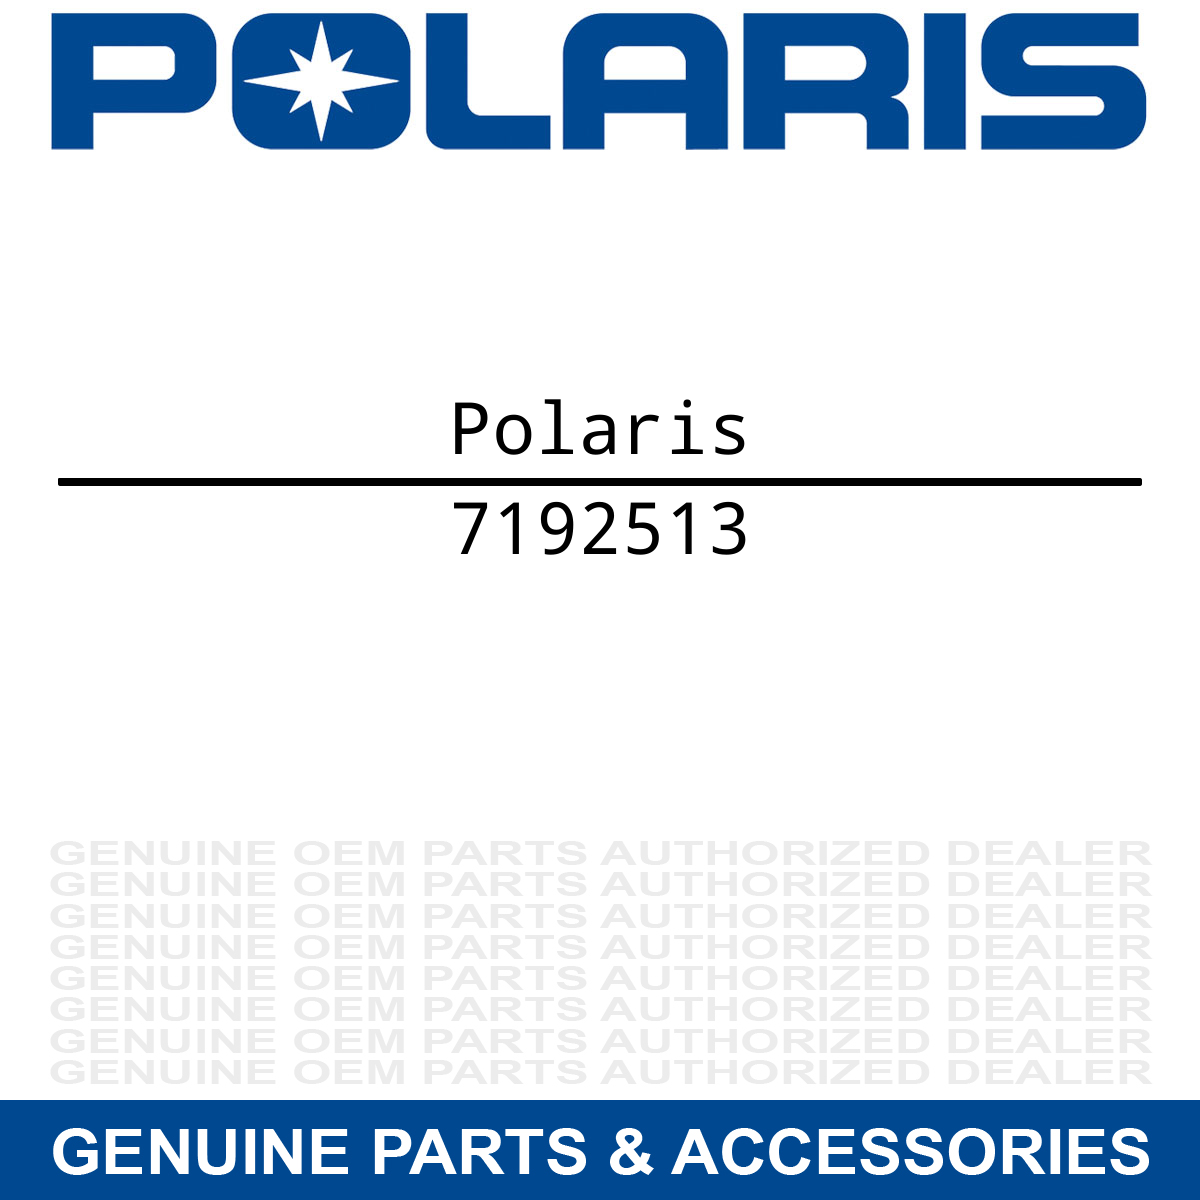 Polaris 7192513 Right Hand Axys Tunnel Decal